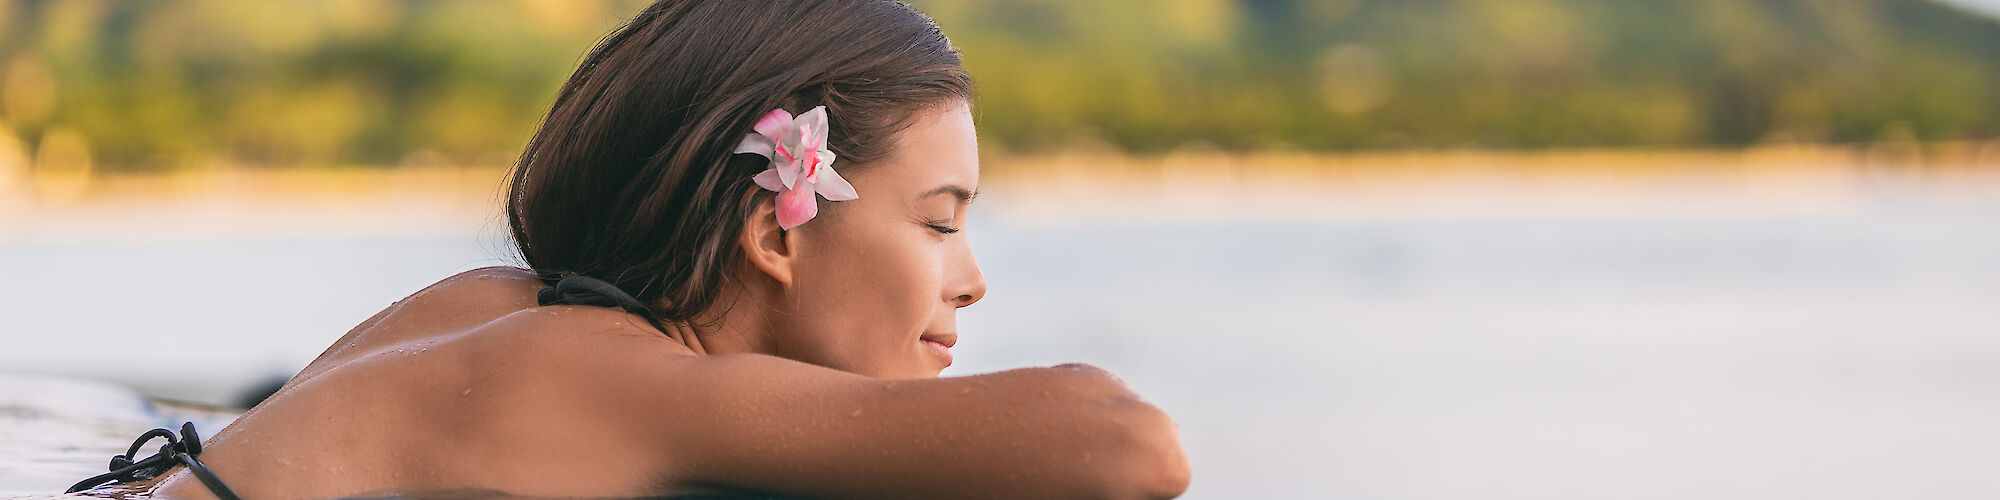 A woman with a flower in her hair relaxes in a pool, with a mountainous landscape in the background under a clear sky.